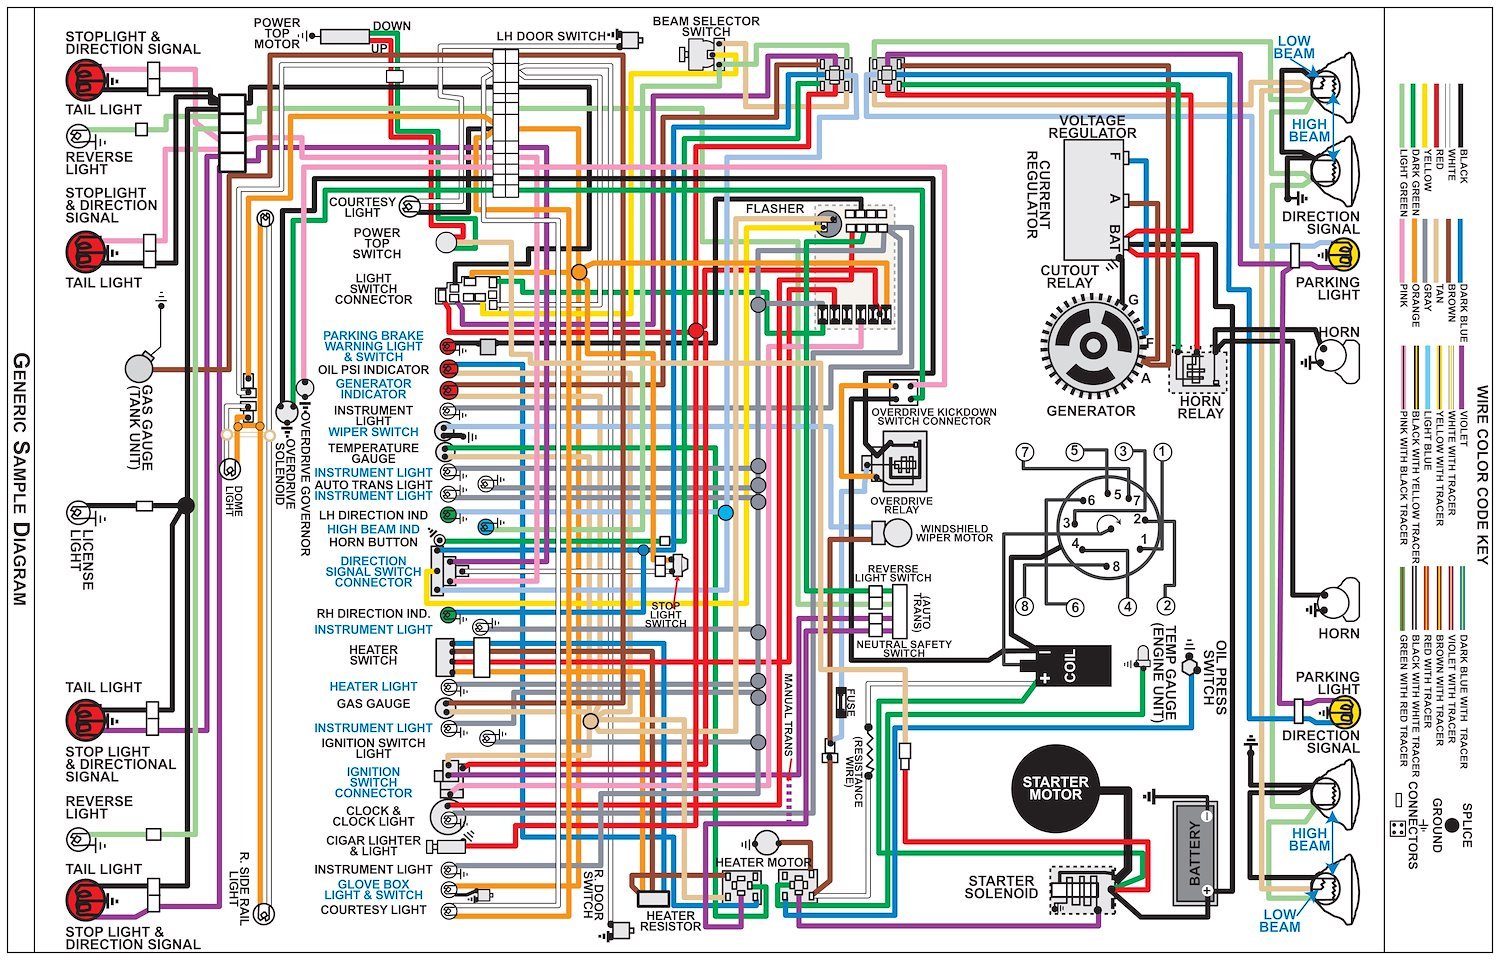 Wiring Diagram for 1967 Ford Galaxie, 11 in x 17 in., Laminated